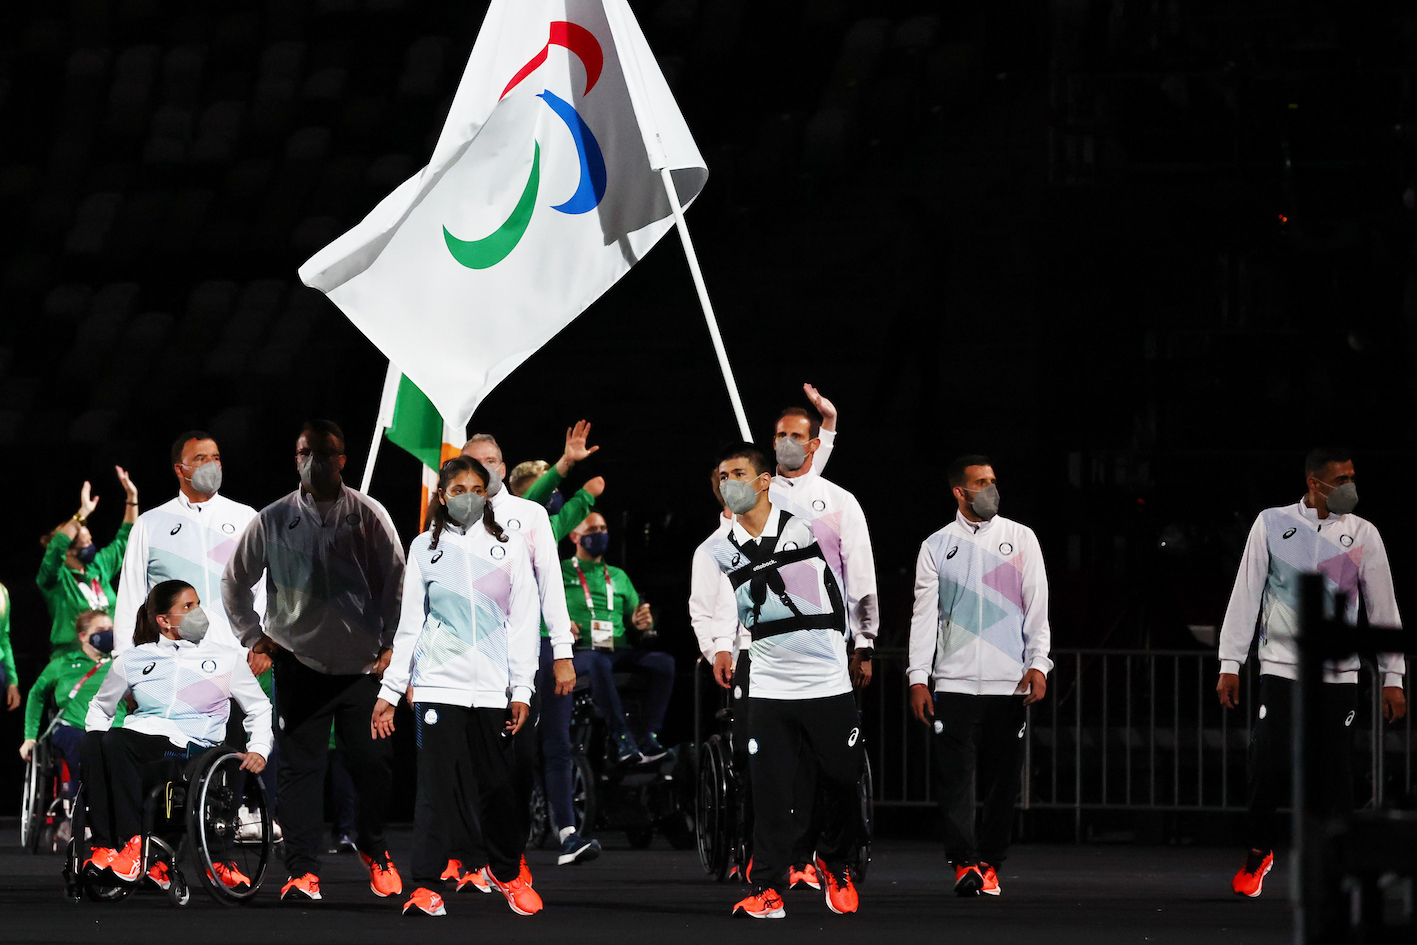 Alia Issa of the Refugee Paralympic Team and Abbas Karimi of the Refugee Paralympic Team lead their contingent during the athletes parade at the opening ceremony (Reuter/ Athit Perawongmetha)